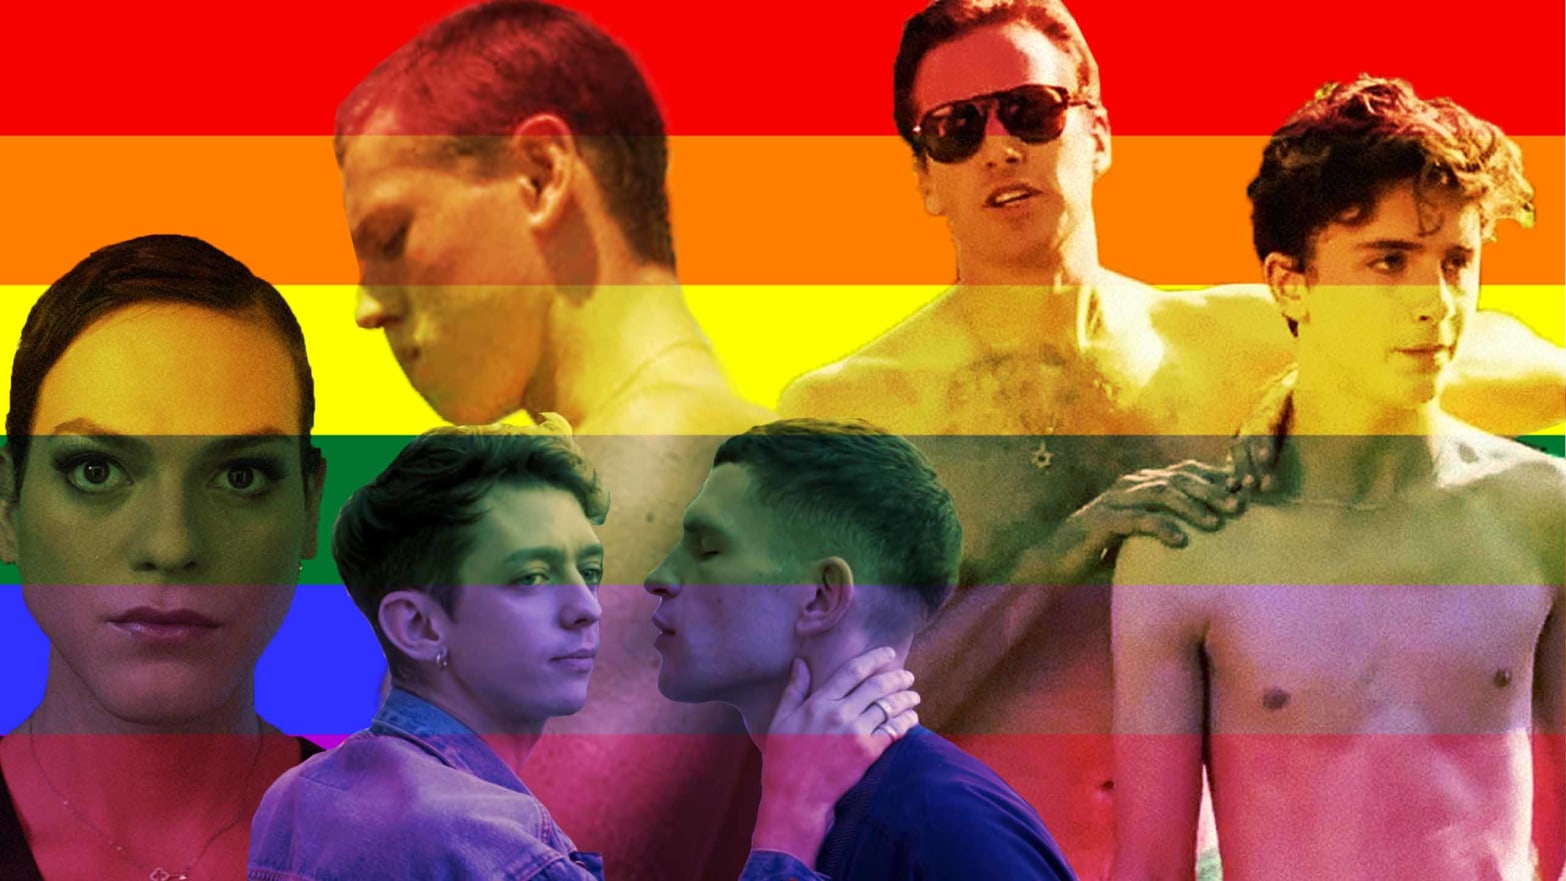 Beyond the Peach Sex The Remarkable Year in LGBT Film pic